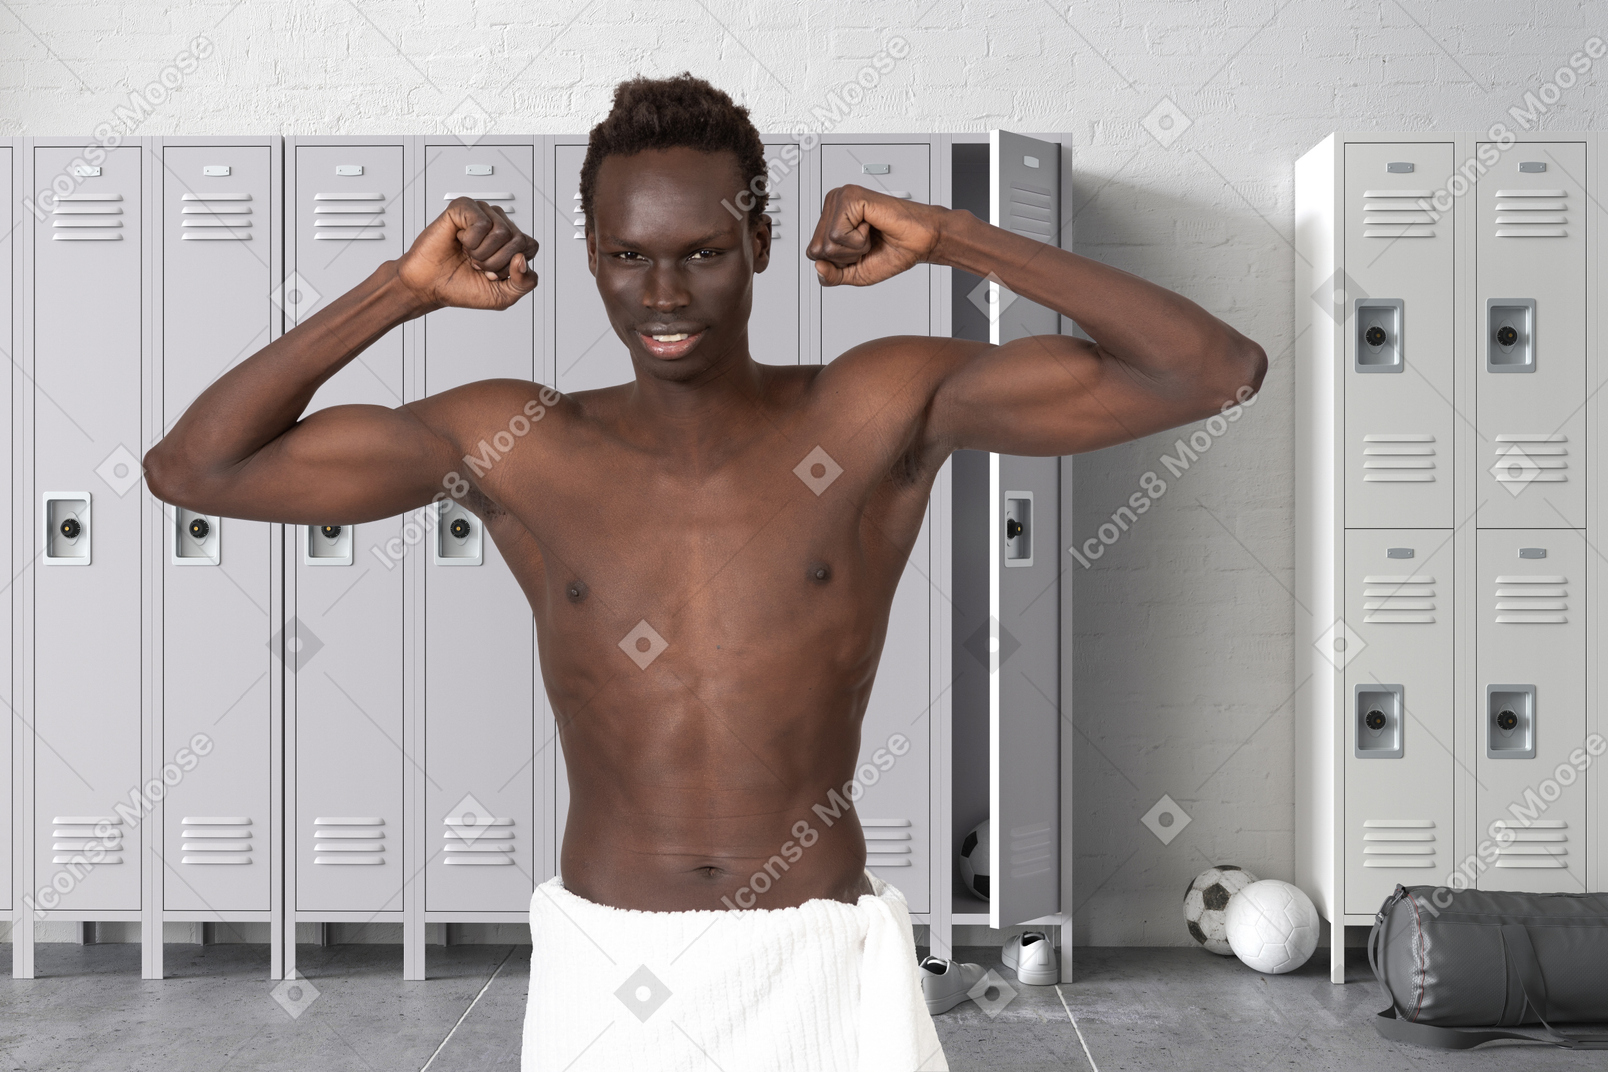 Handsome black man showing his muscles in a gym locker room